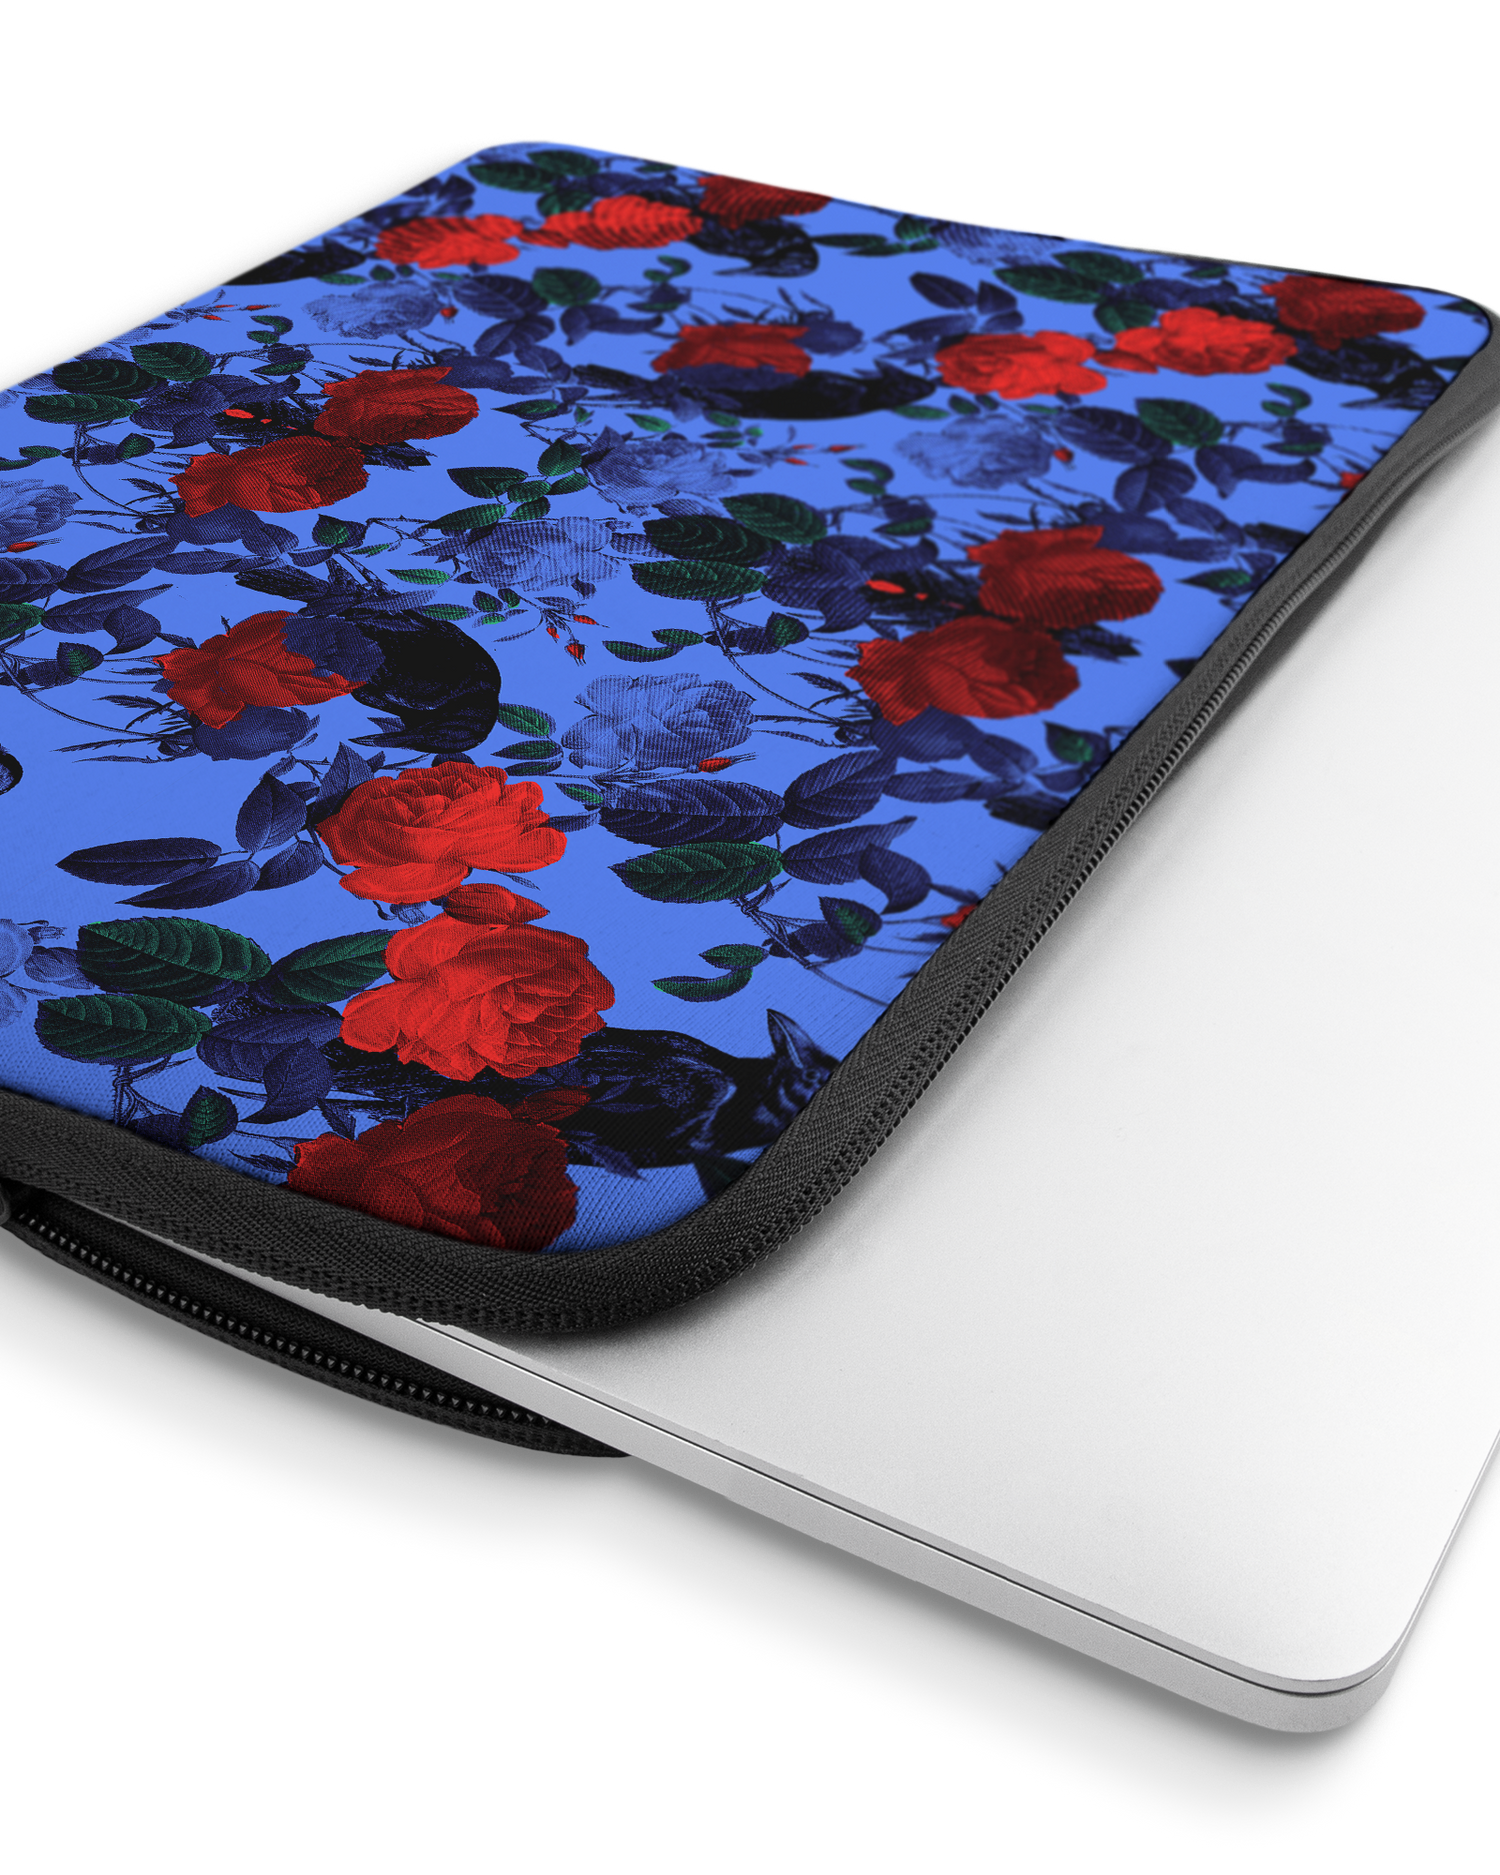 Roses And Ravens Laptop Case 16 inch with device inside